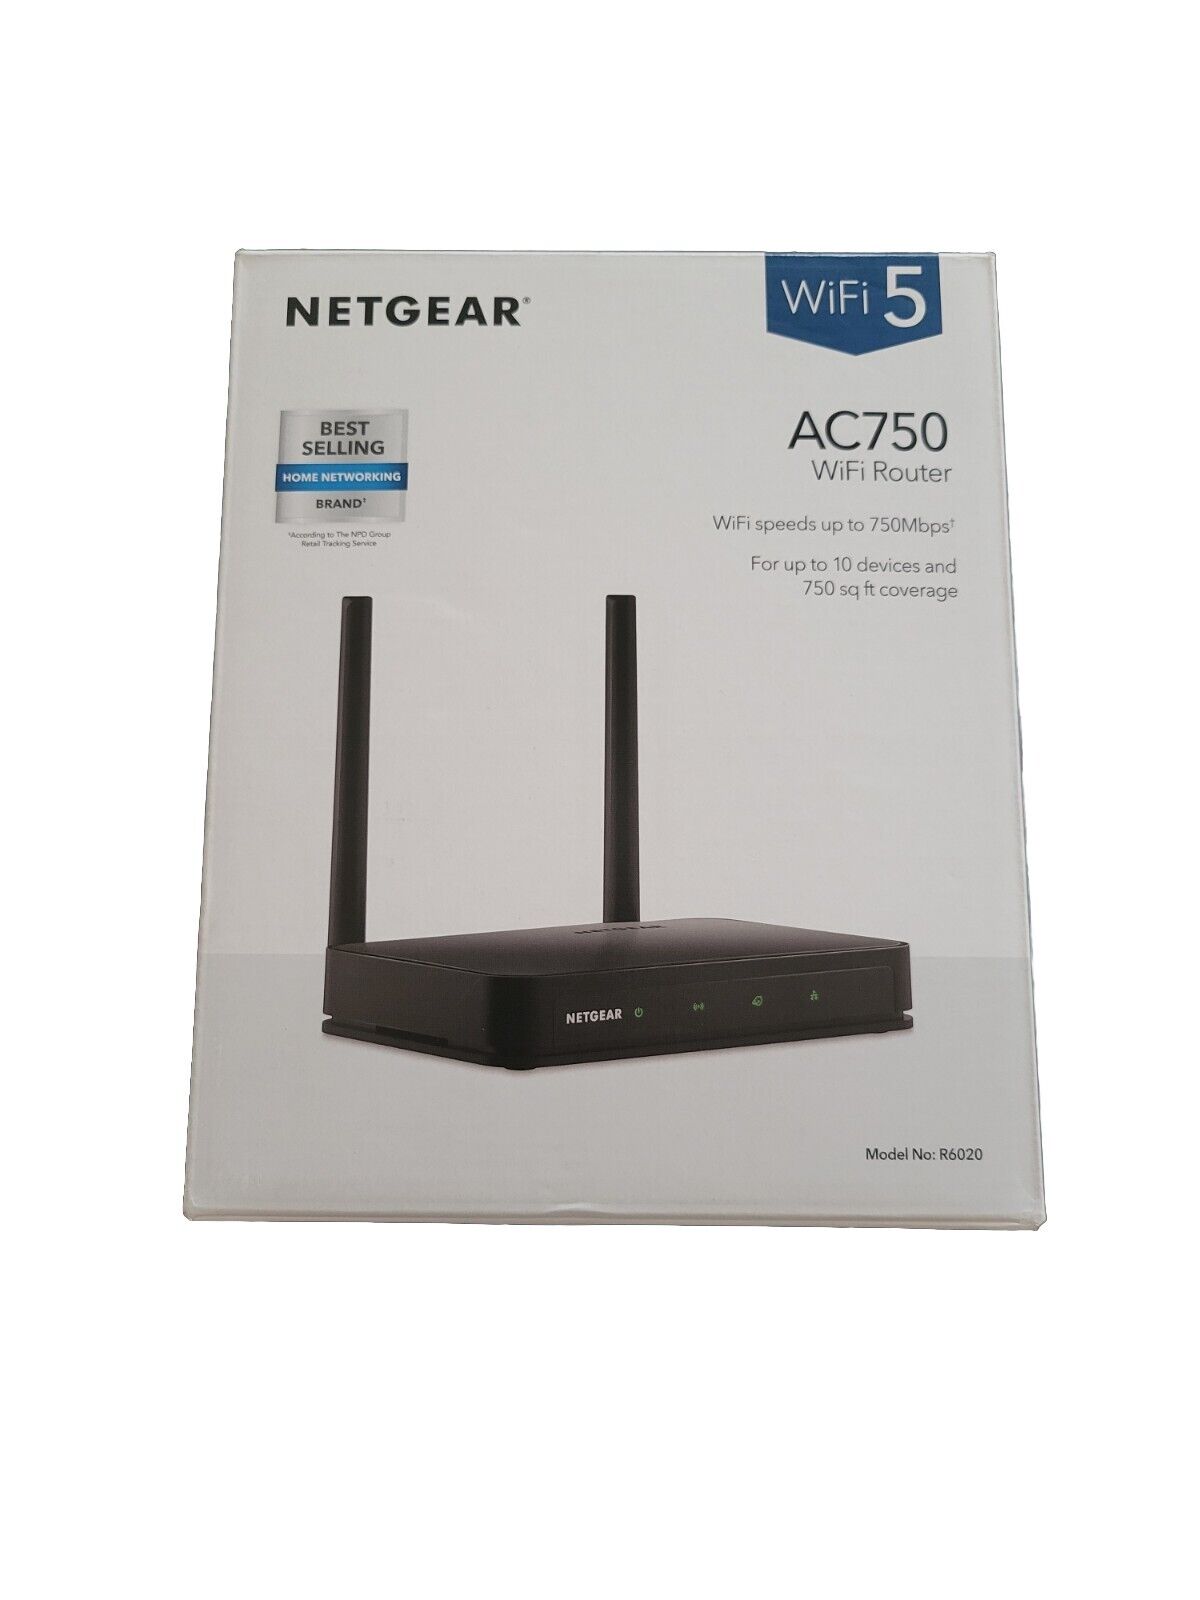 New Sealed Netgear AC750 Dual Band WiFi Router Model R6020